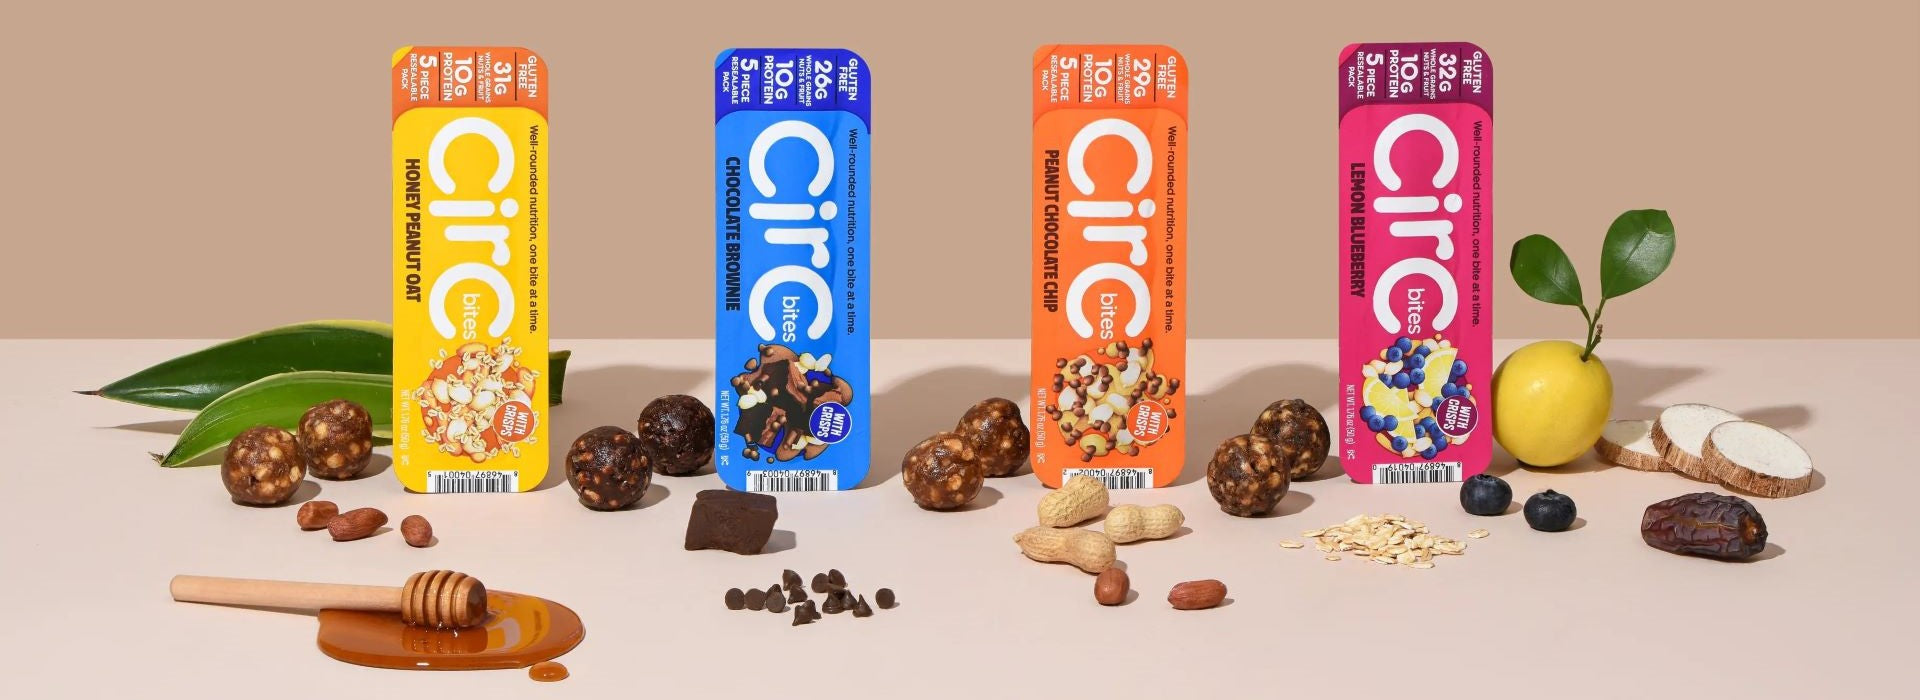 CirC energy bites with all natural ingredients, dates, peanuts, oats and agave